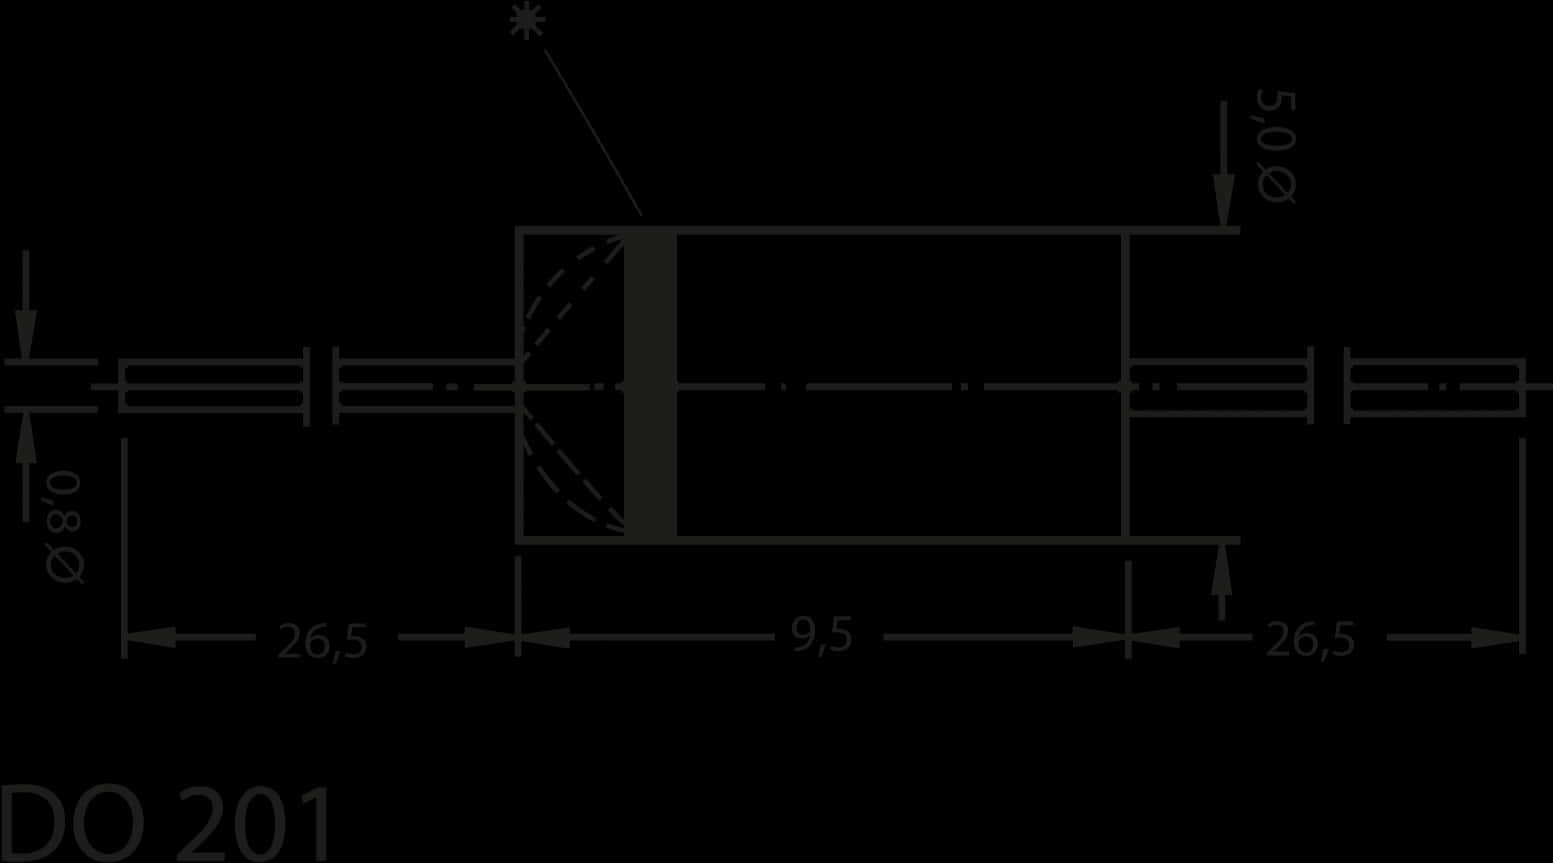 Technical Drawing Black Background PNG image